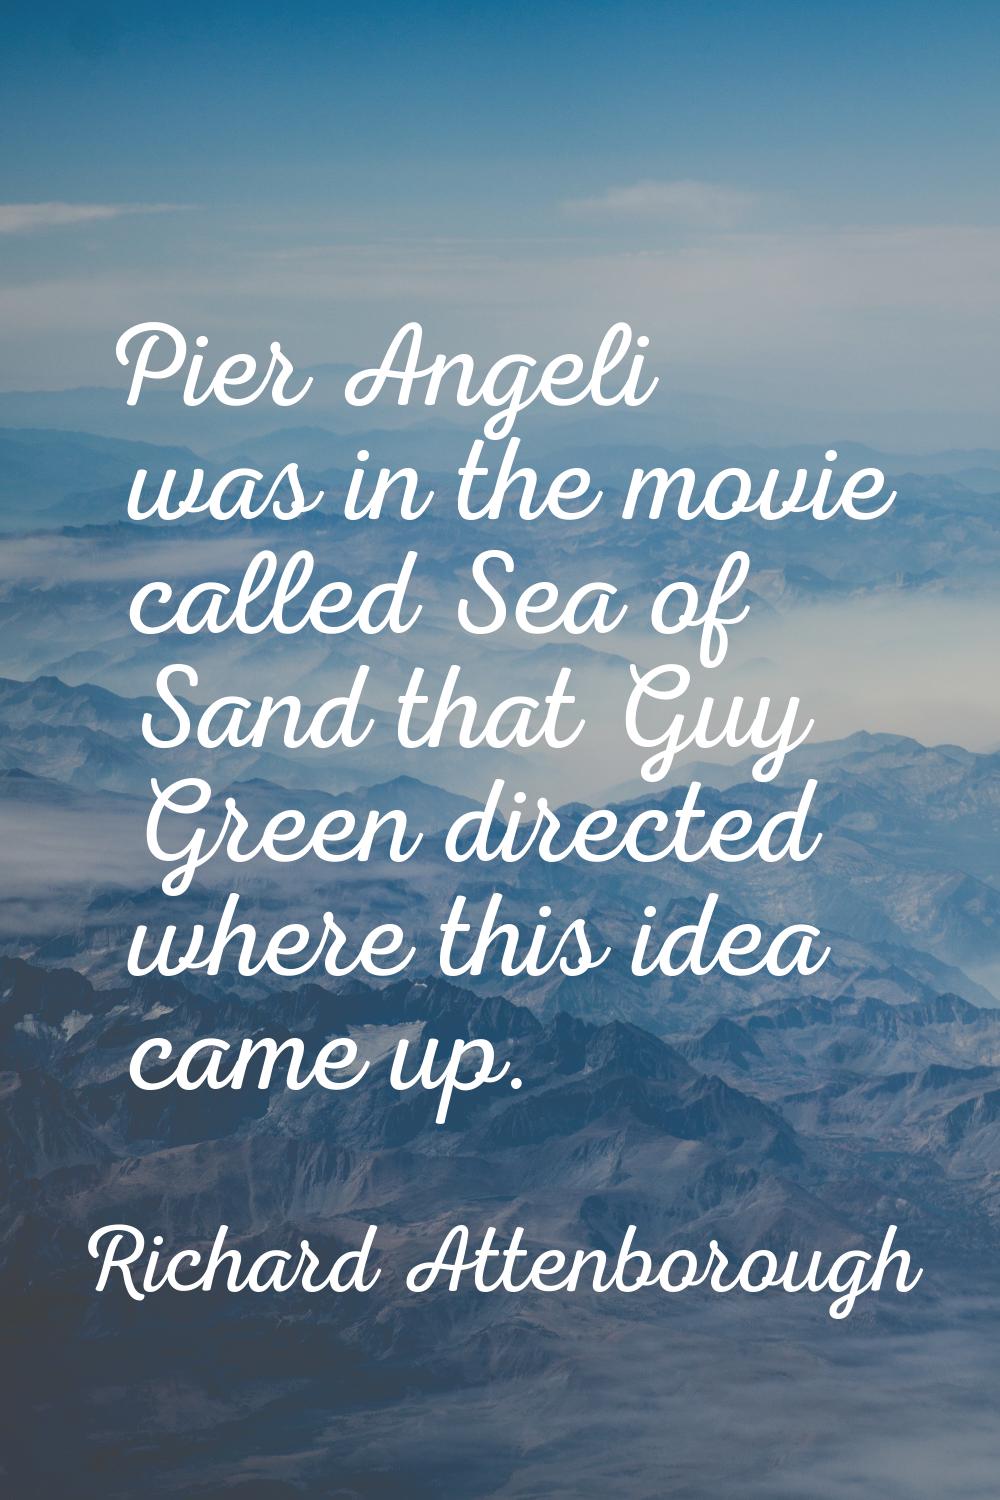 Pier Angeli was in the movie called Sea of Sand that Guy Green directed where this idea came up.